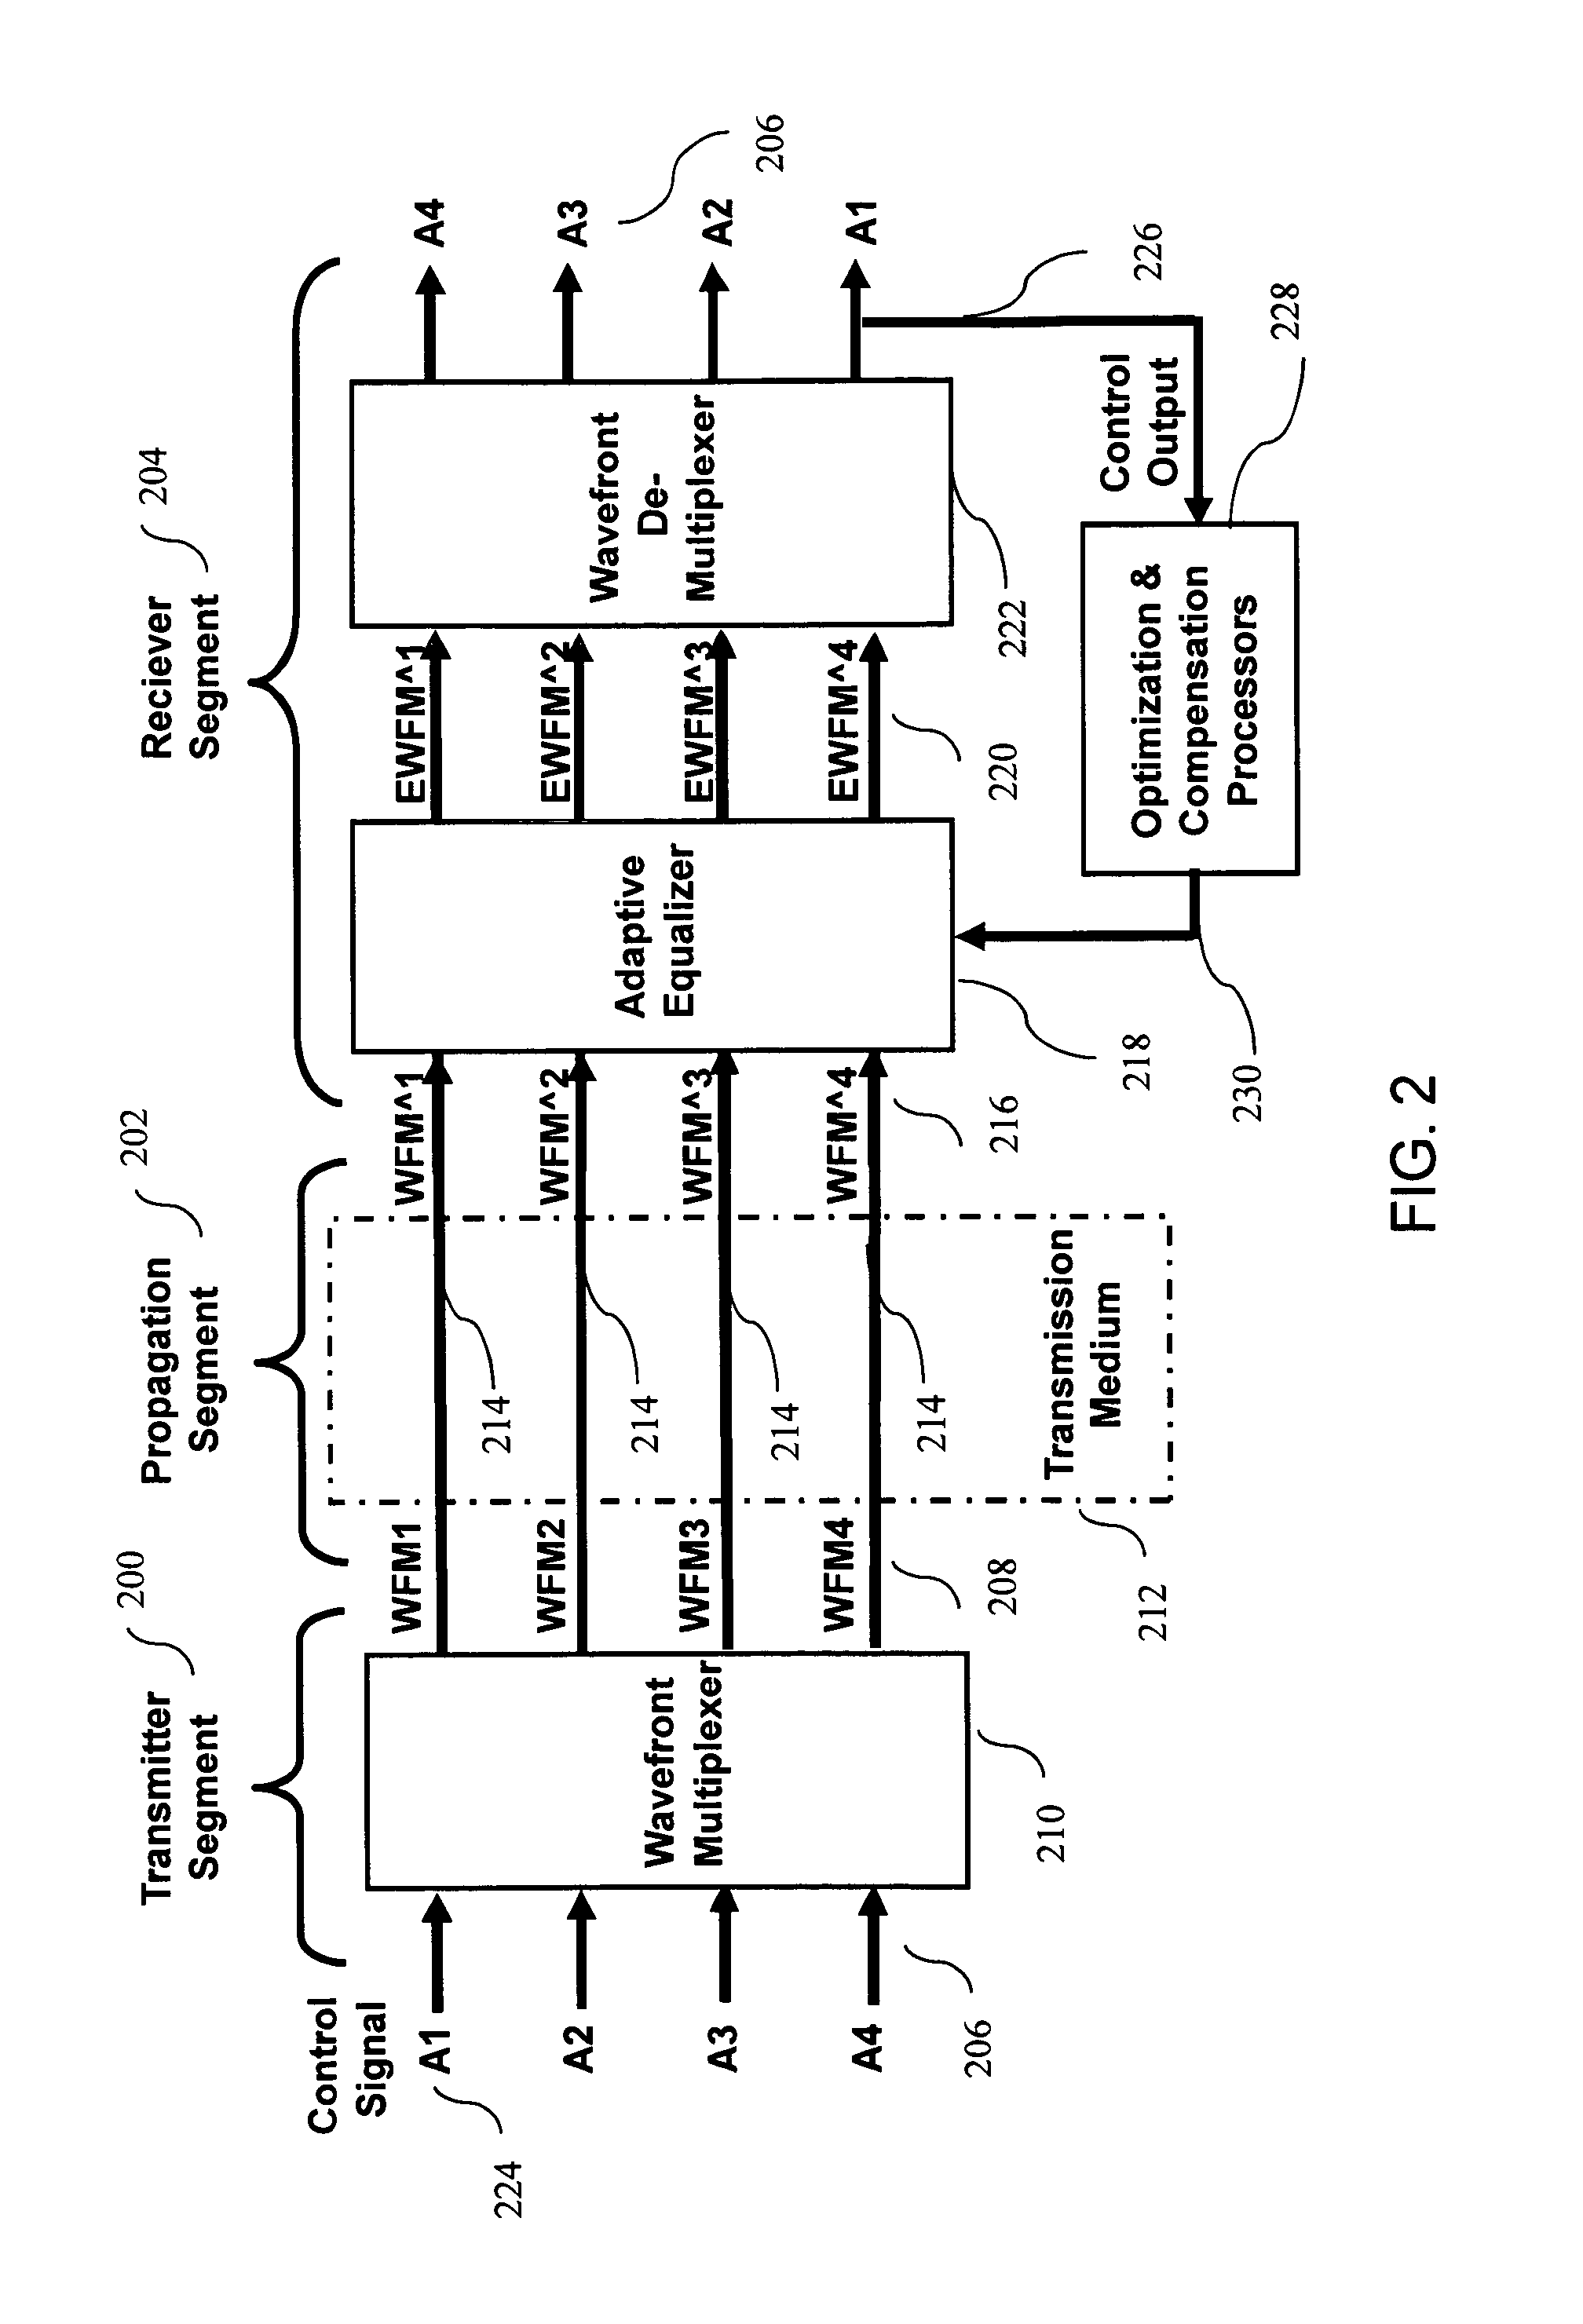 Communication system for dynamically combining power from a plurality of propagation channels in order to improve power levels of transmitted signals without affecting receiver and propagation segments